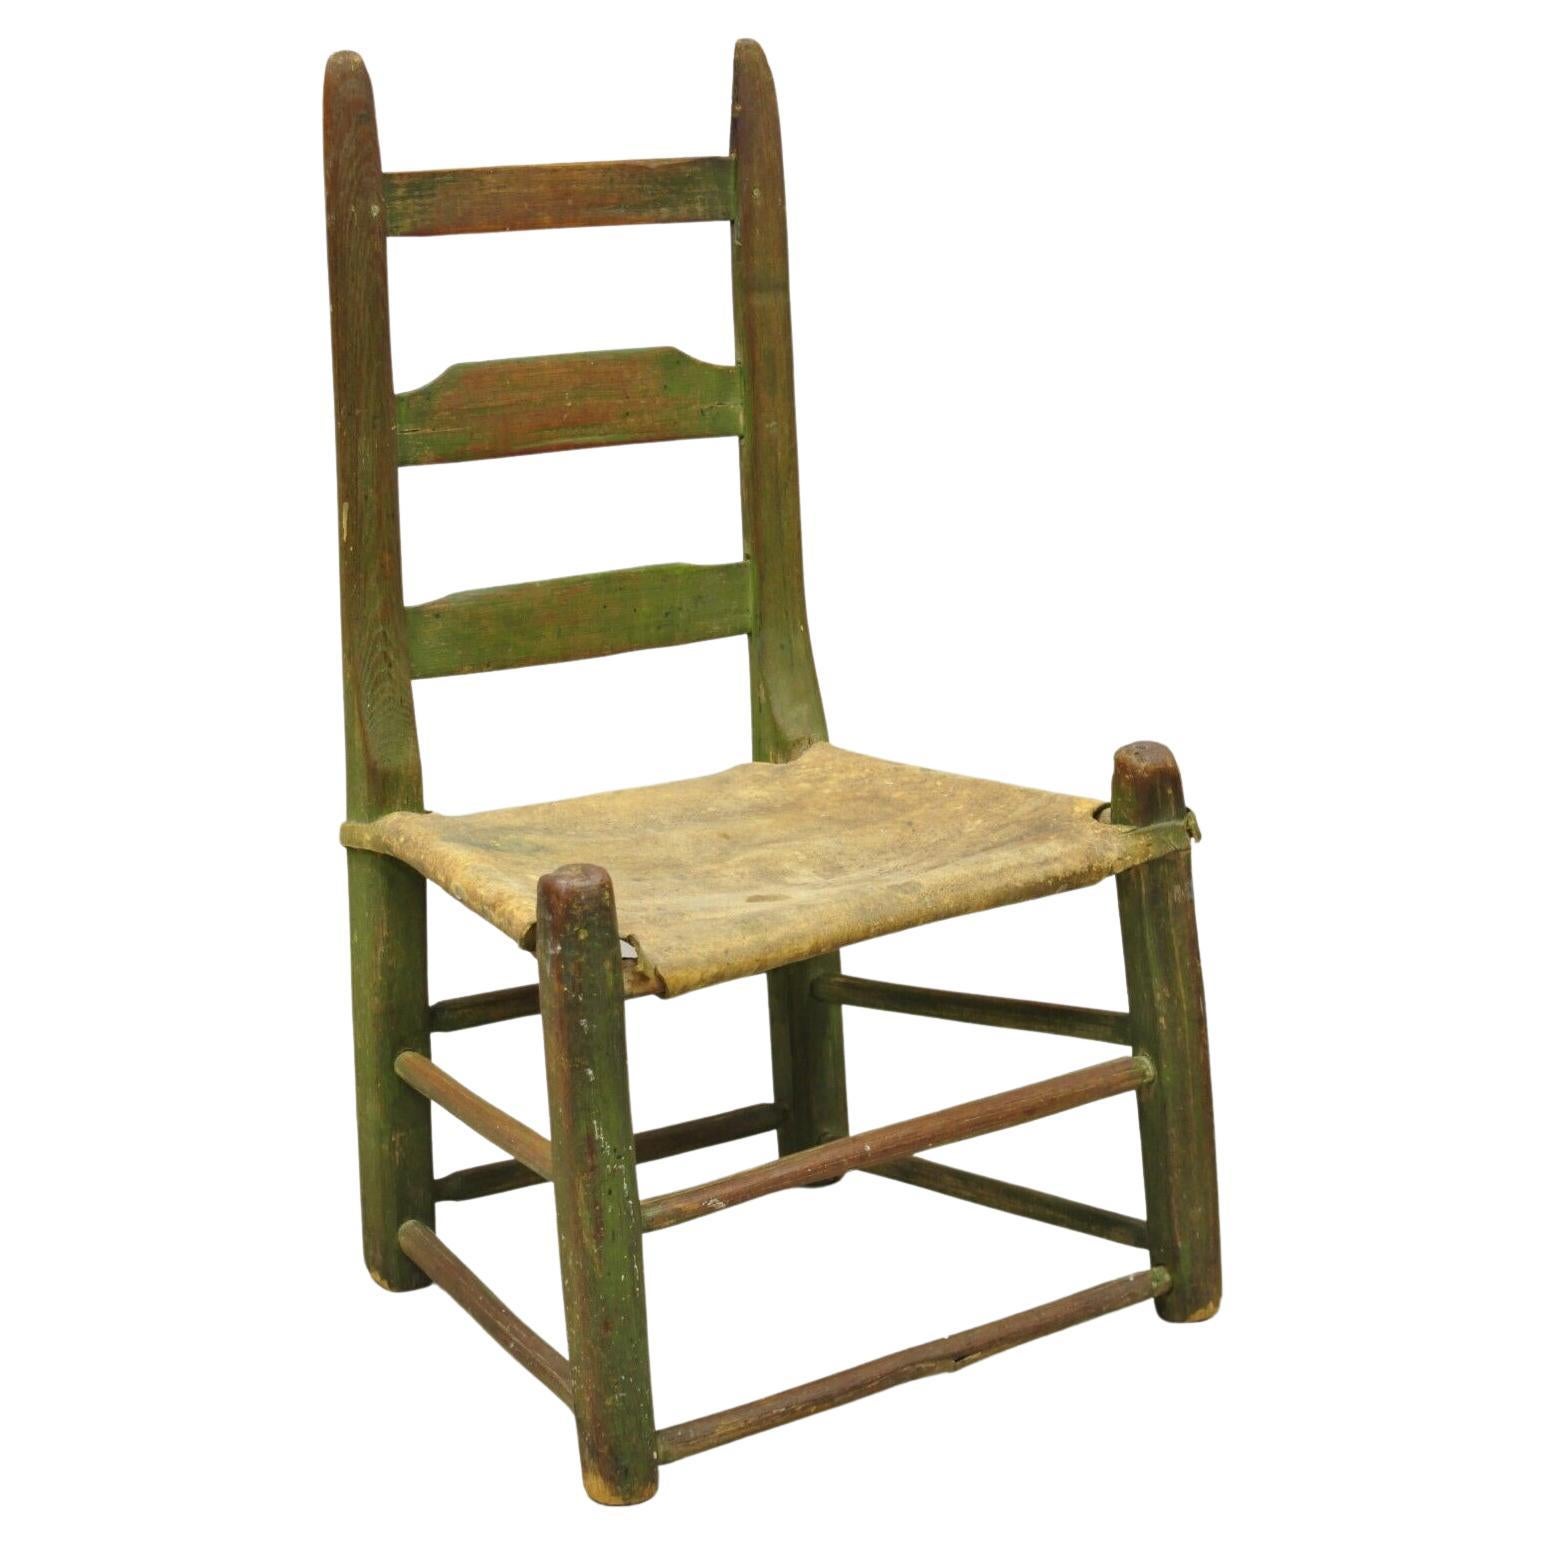 Antique Small Ladder Back Green Primitive Rustic Chair with Deer Hide Seat